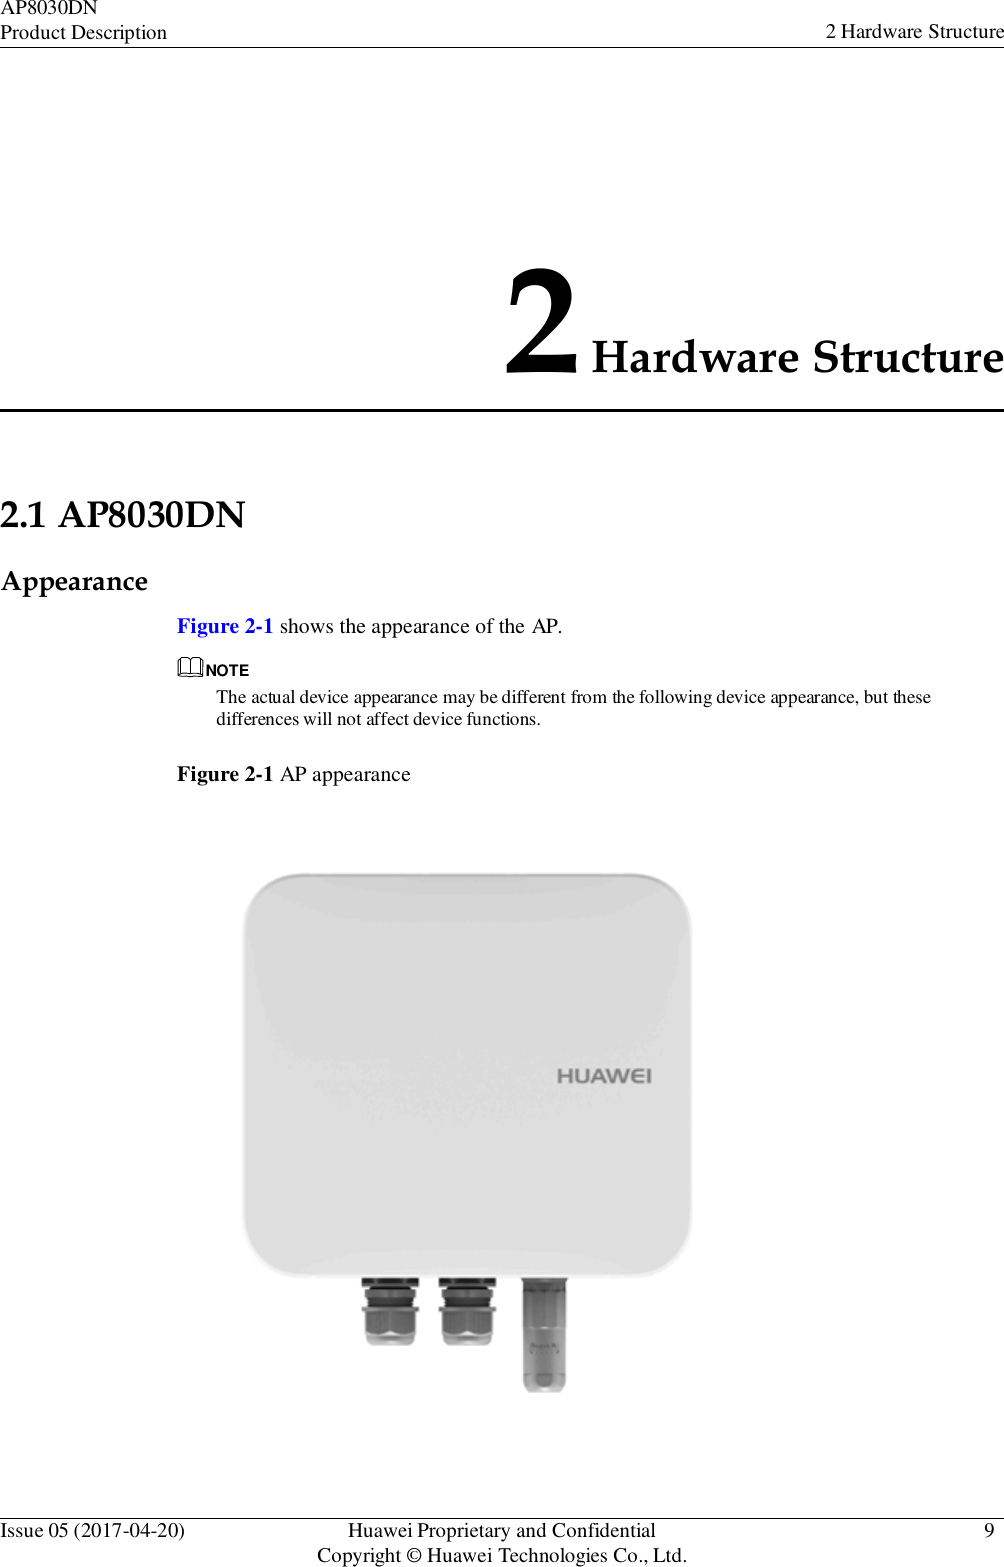 Issue 05 (2017-04-20) Huawei Proprietary and Confidential Copyright © Huawei Technologies Co., Ltd. 9 AP8030DN Product Description 2 Hardware Structure            2Hardware Structure     2.1 AP8030DN  Appearance    Figure 2-1 shows the appearance of the AP.  NOTE The actual device appearance may be different from the following device appearance, but these differences will not affect device functions.   Figure 2-1 AP appearance  